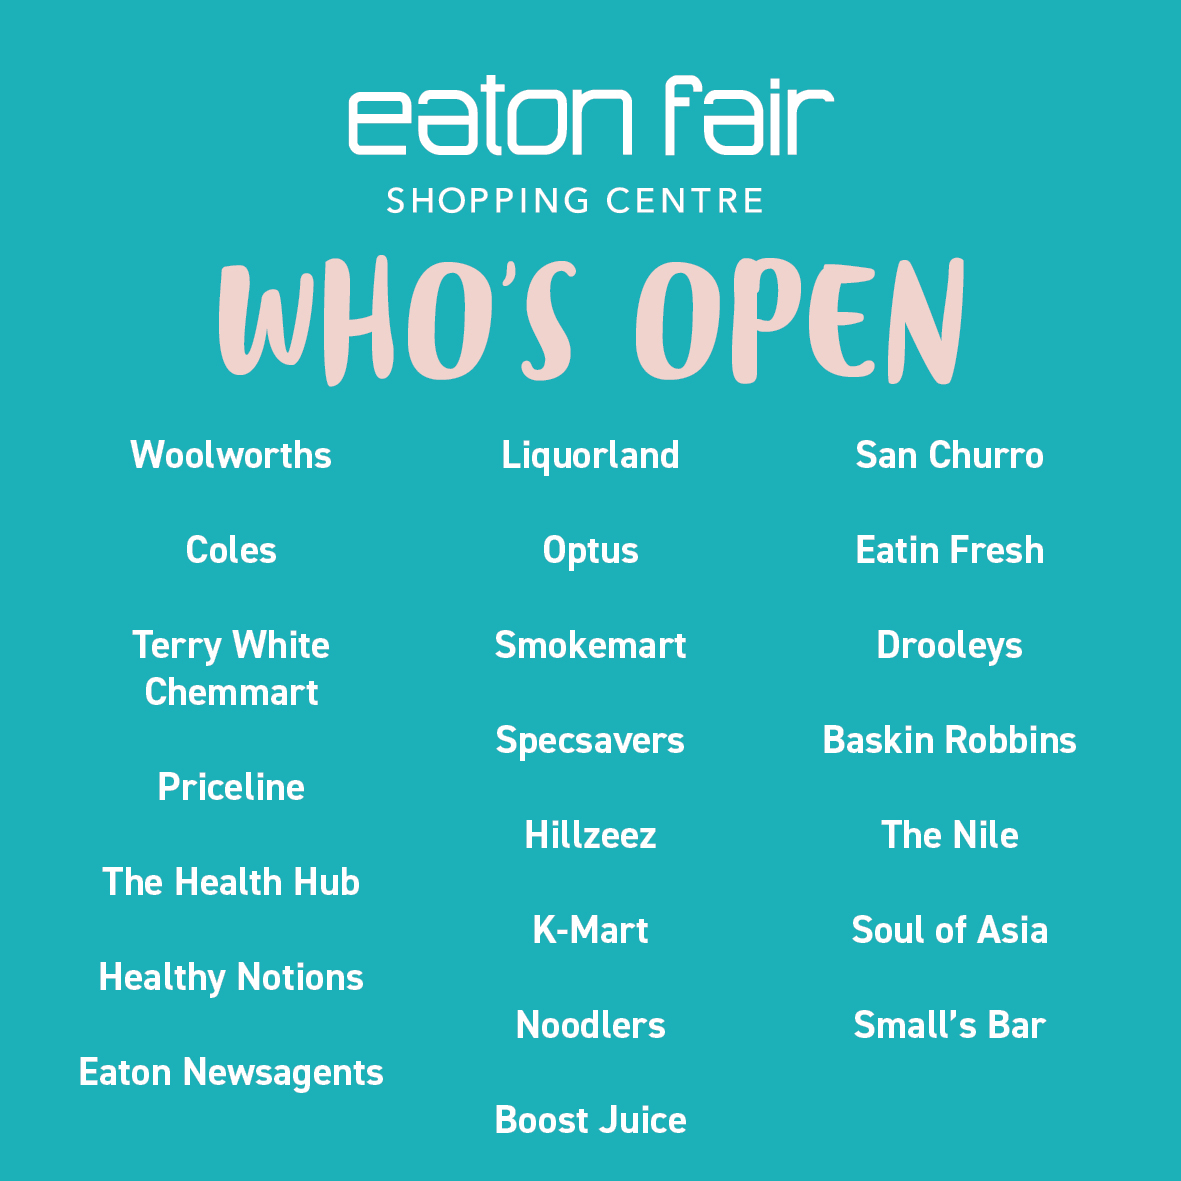 Who’s open this week at Eaton Fair